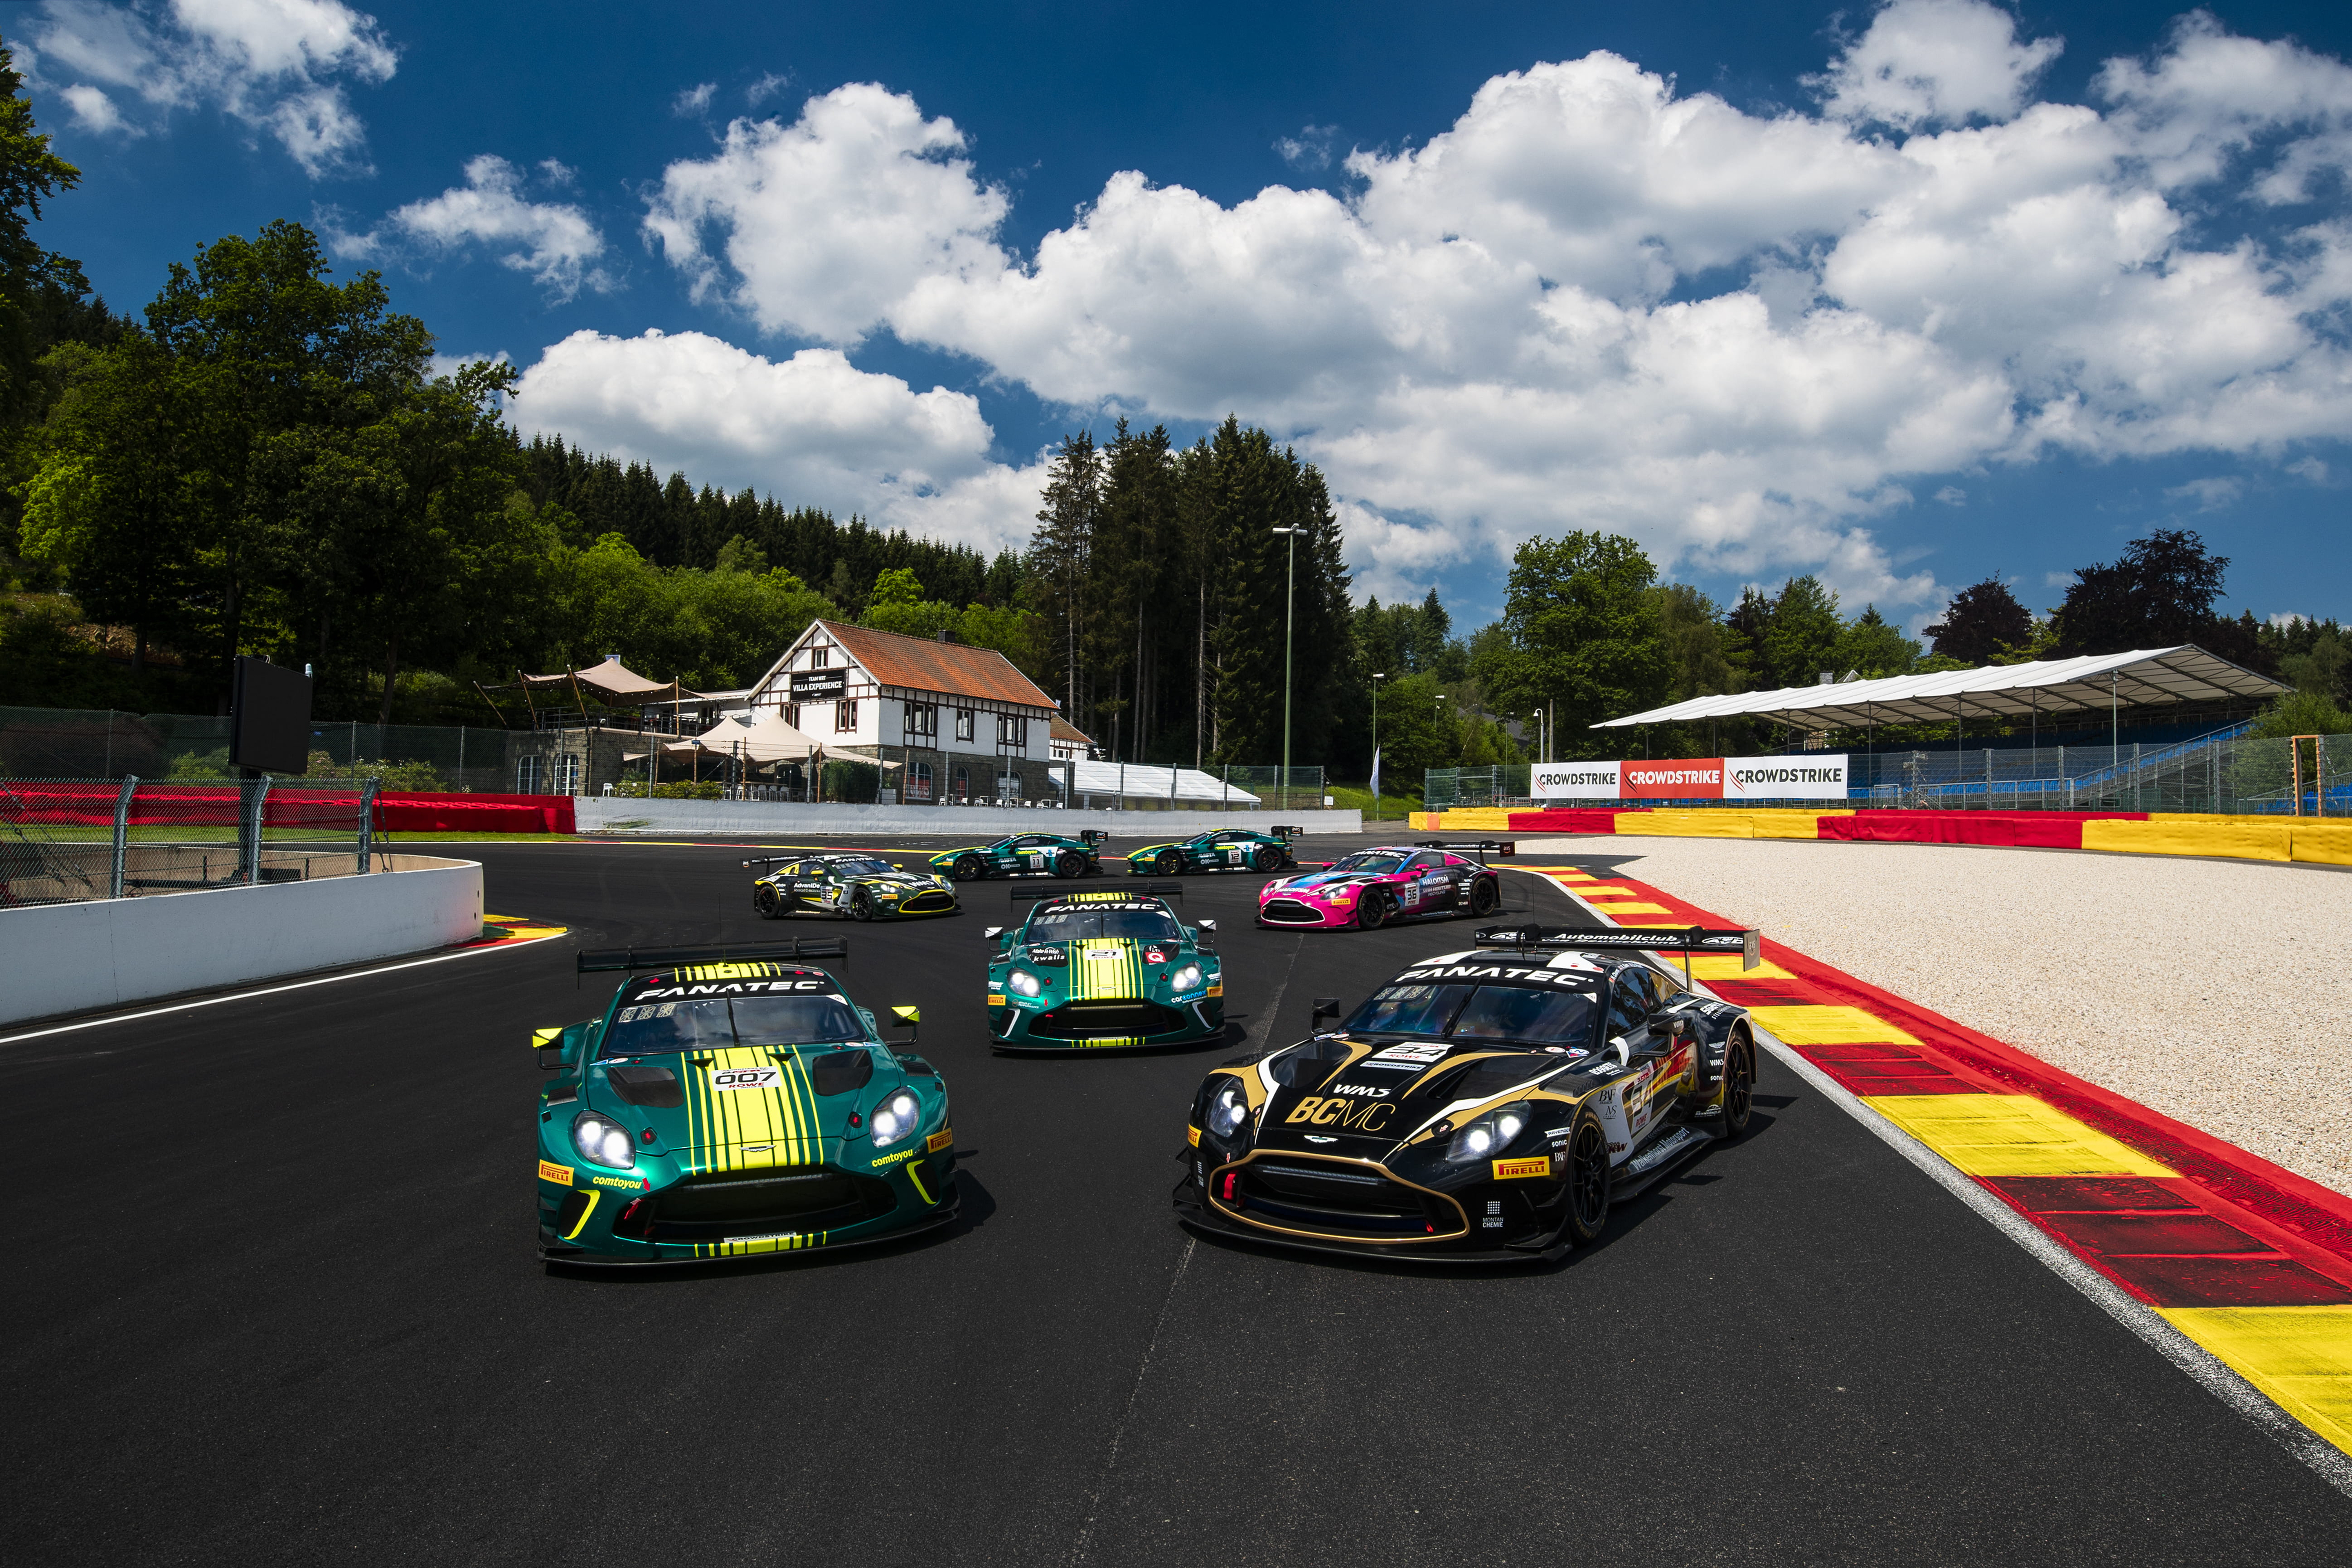 Seven Aston Martin Vantage GT3s competed for strongest attack ever at Crowdstrike 24 Hours of Spa